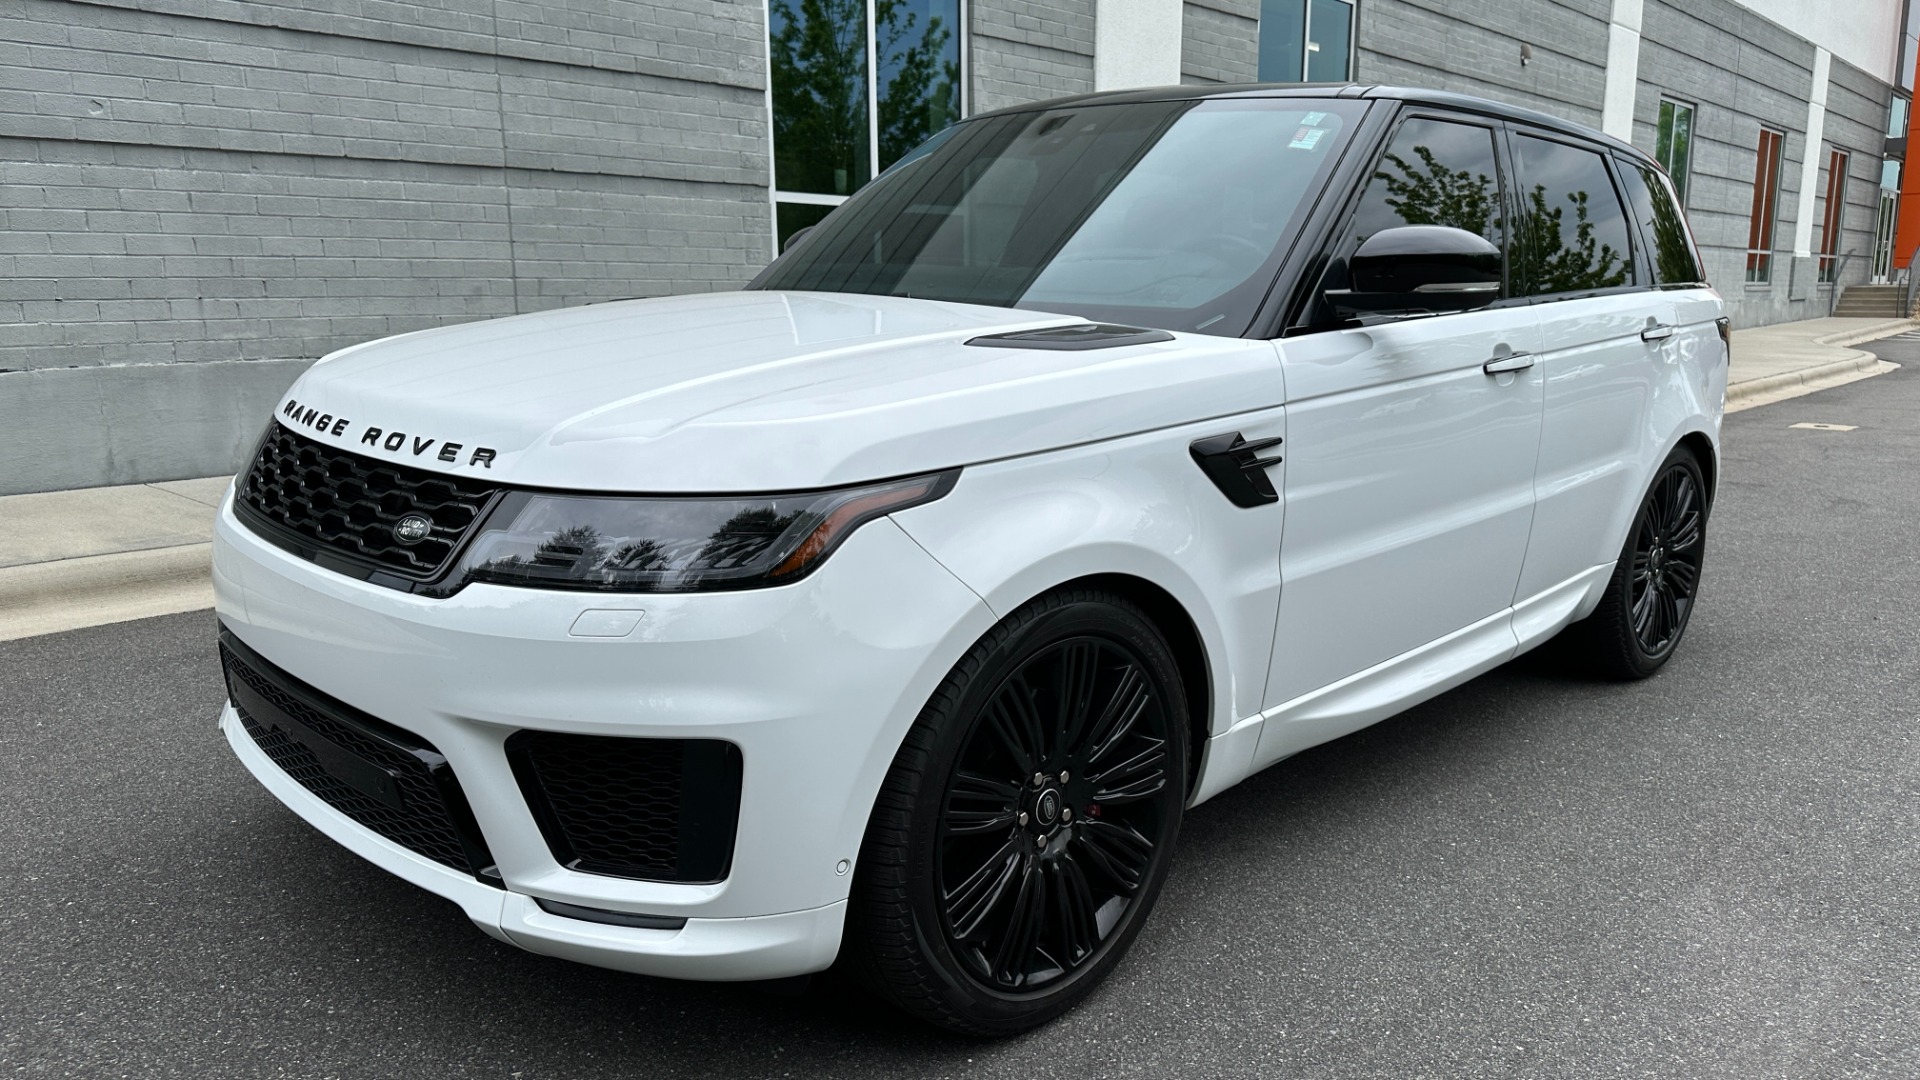 Used 2022 Land Rover Range Rover Sport AUTOBIOGRAPHY / 22 WAY MASSAGE SEATS / DRIVER ASSIST / HEADS UP DISPLAY for sale $99,999 at Formula Imports in Charlotte NC 28227 2